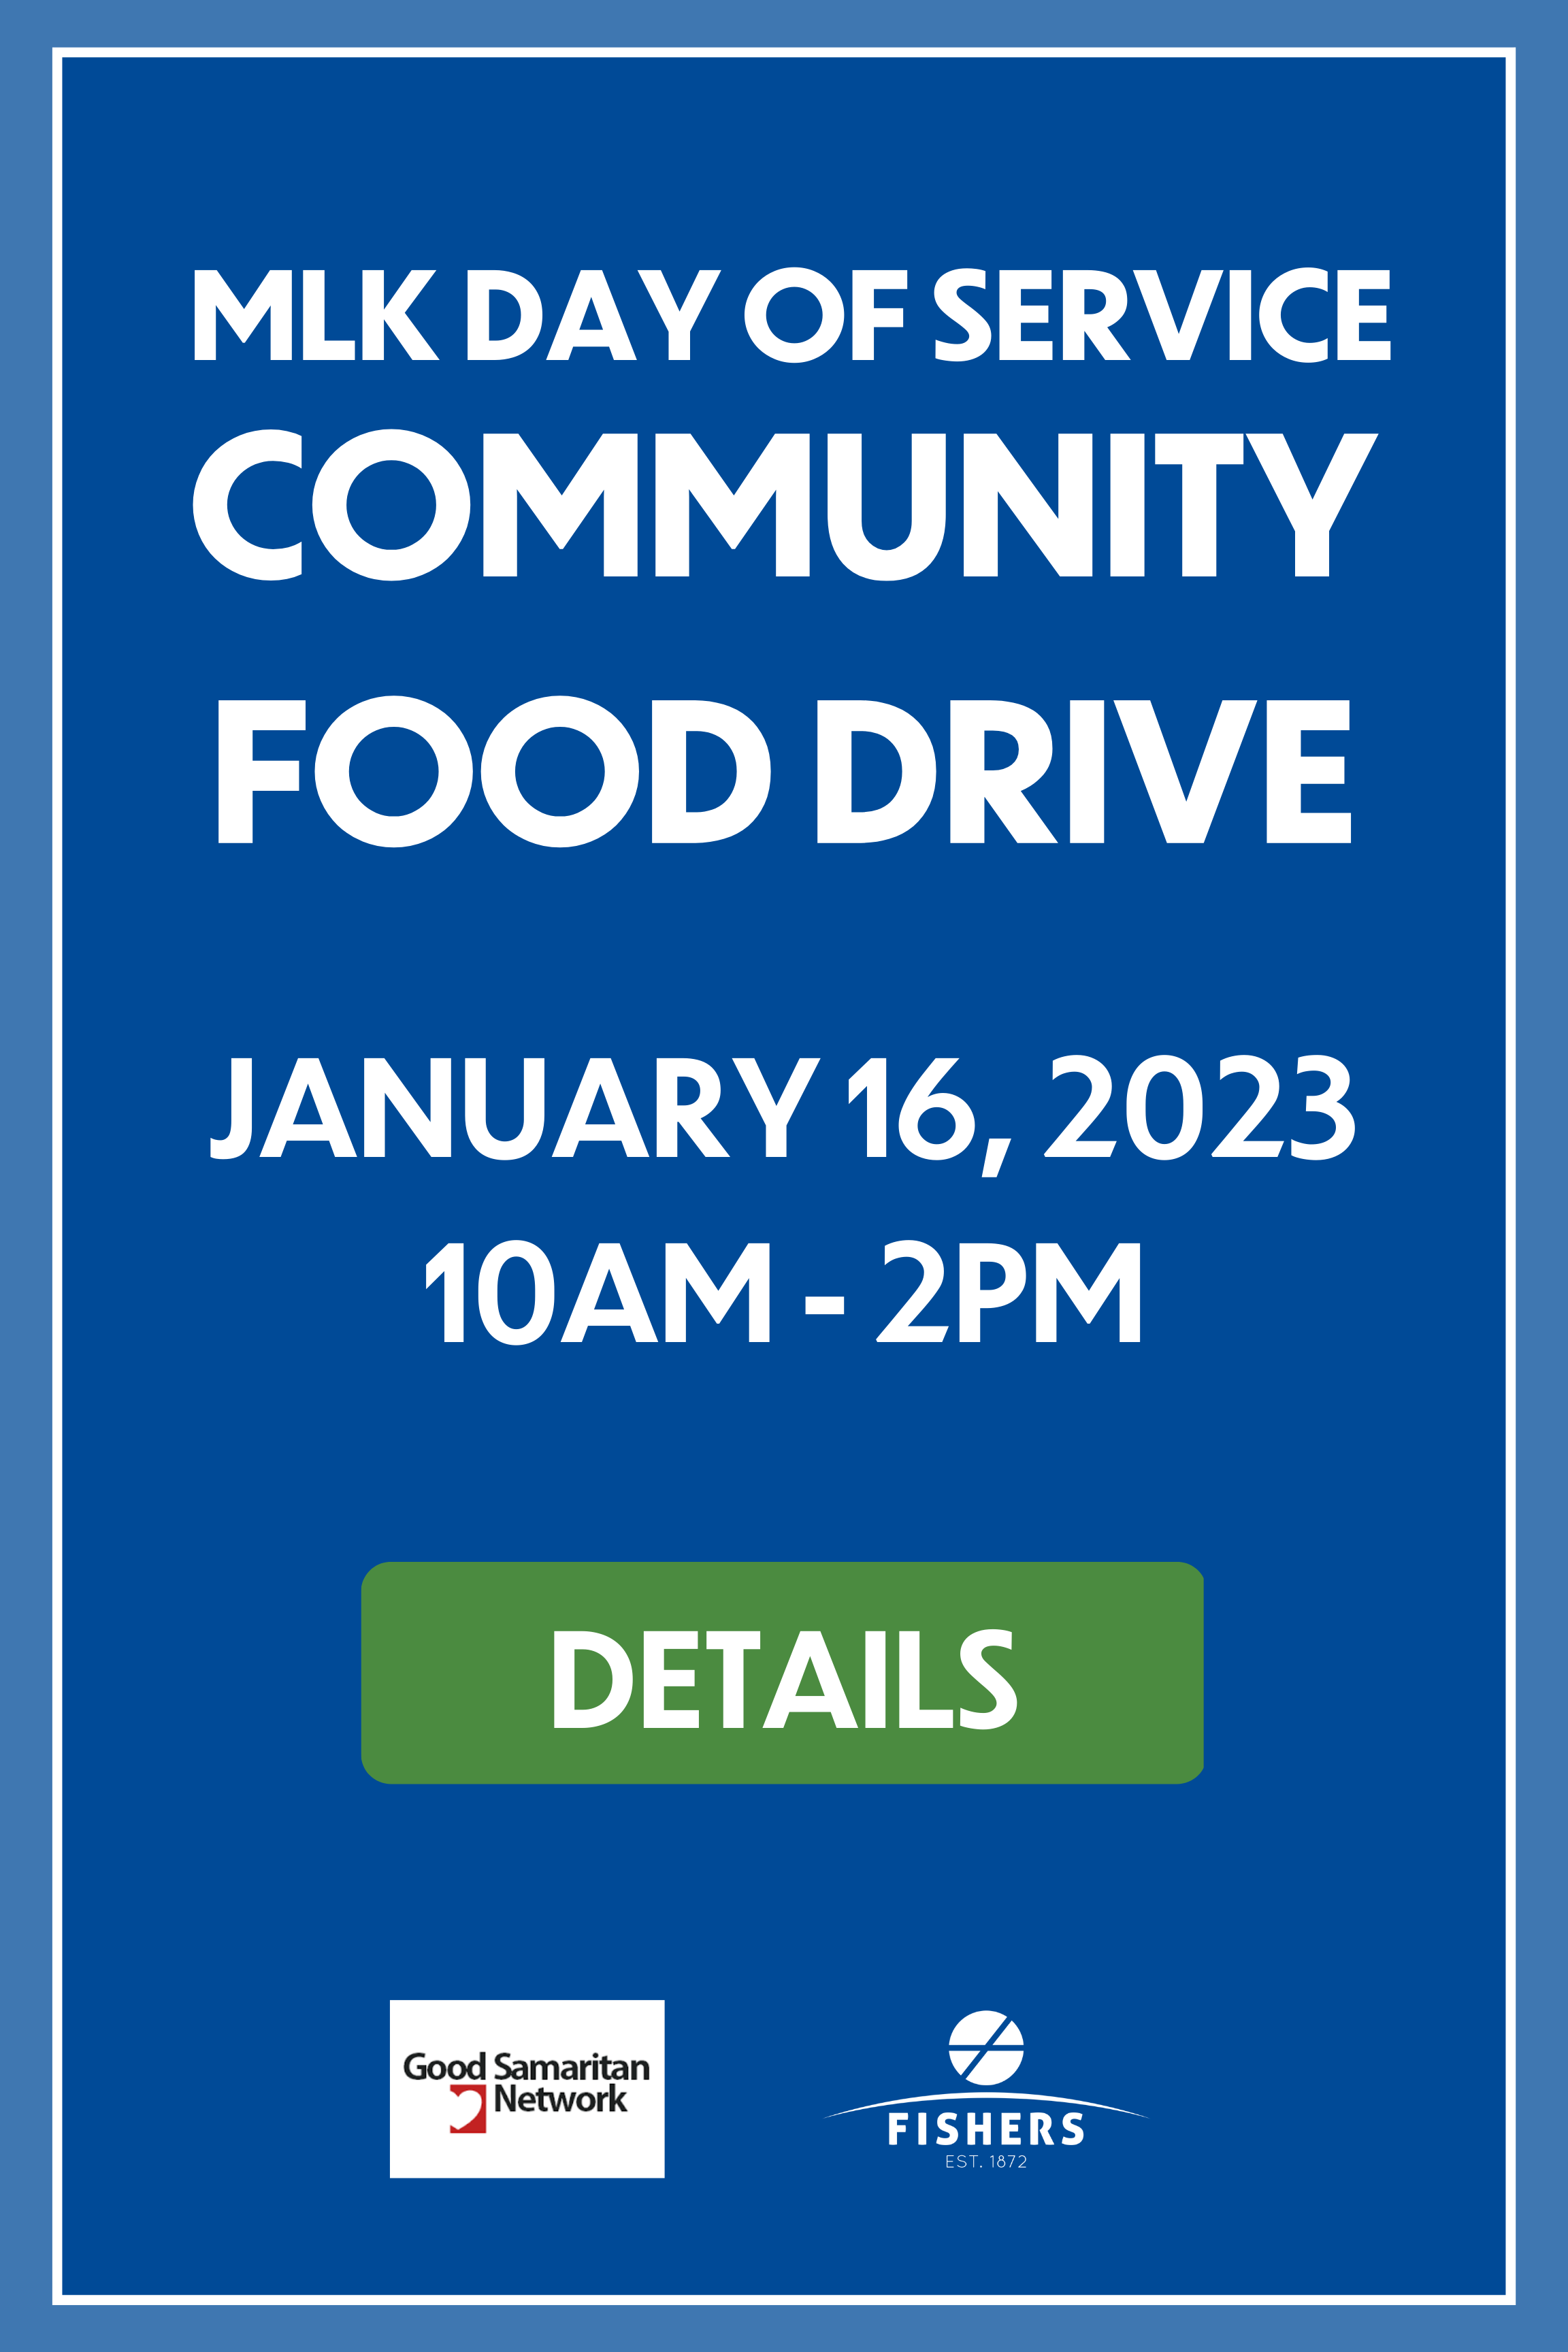 mlk day of service community food drive january 16 10am-2pm. learn more at thisisfishers.com/mlk